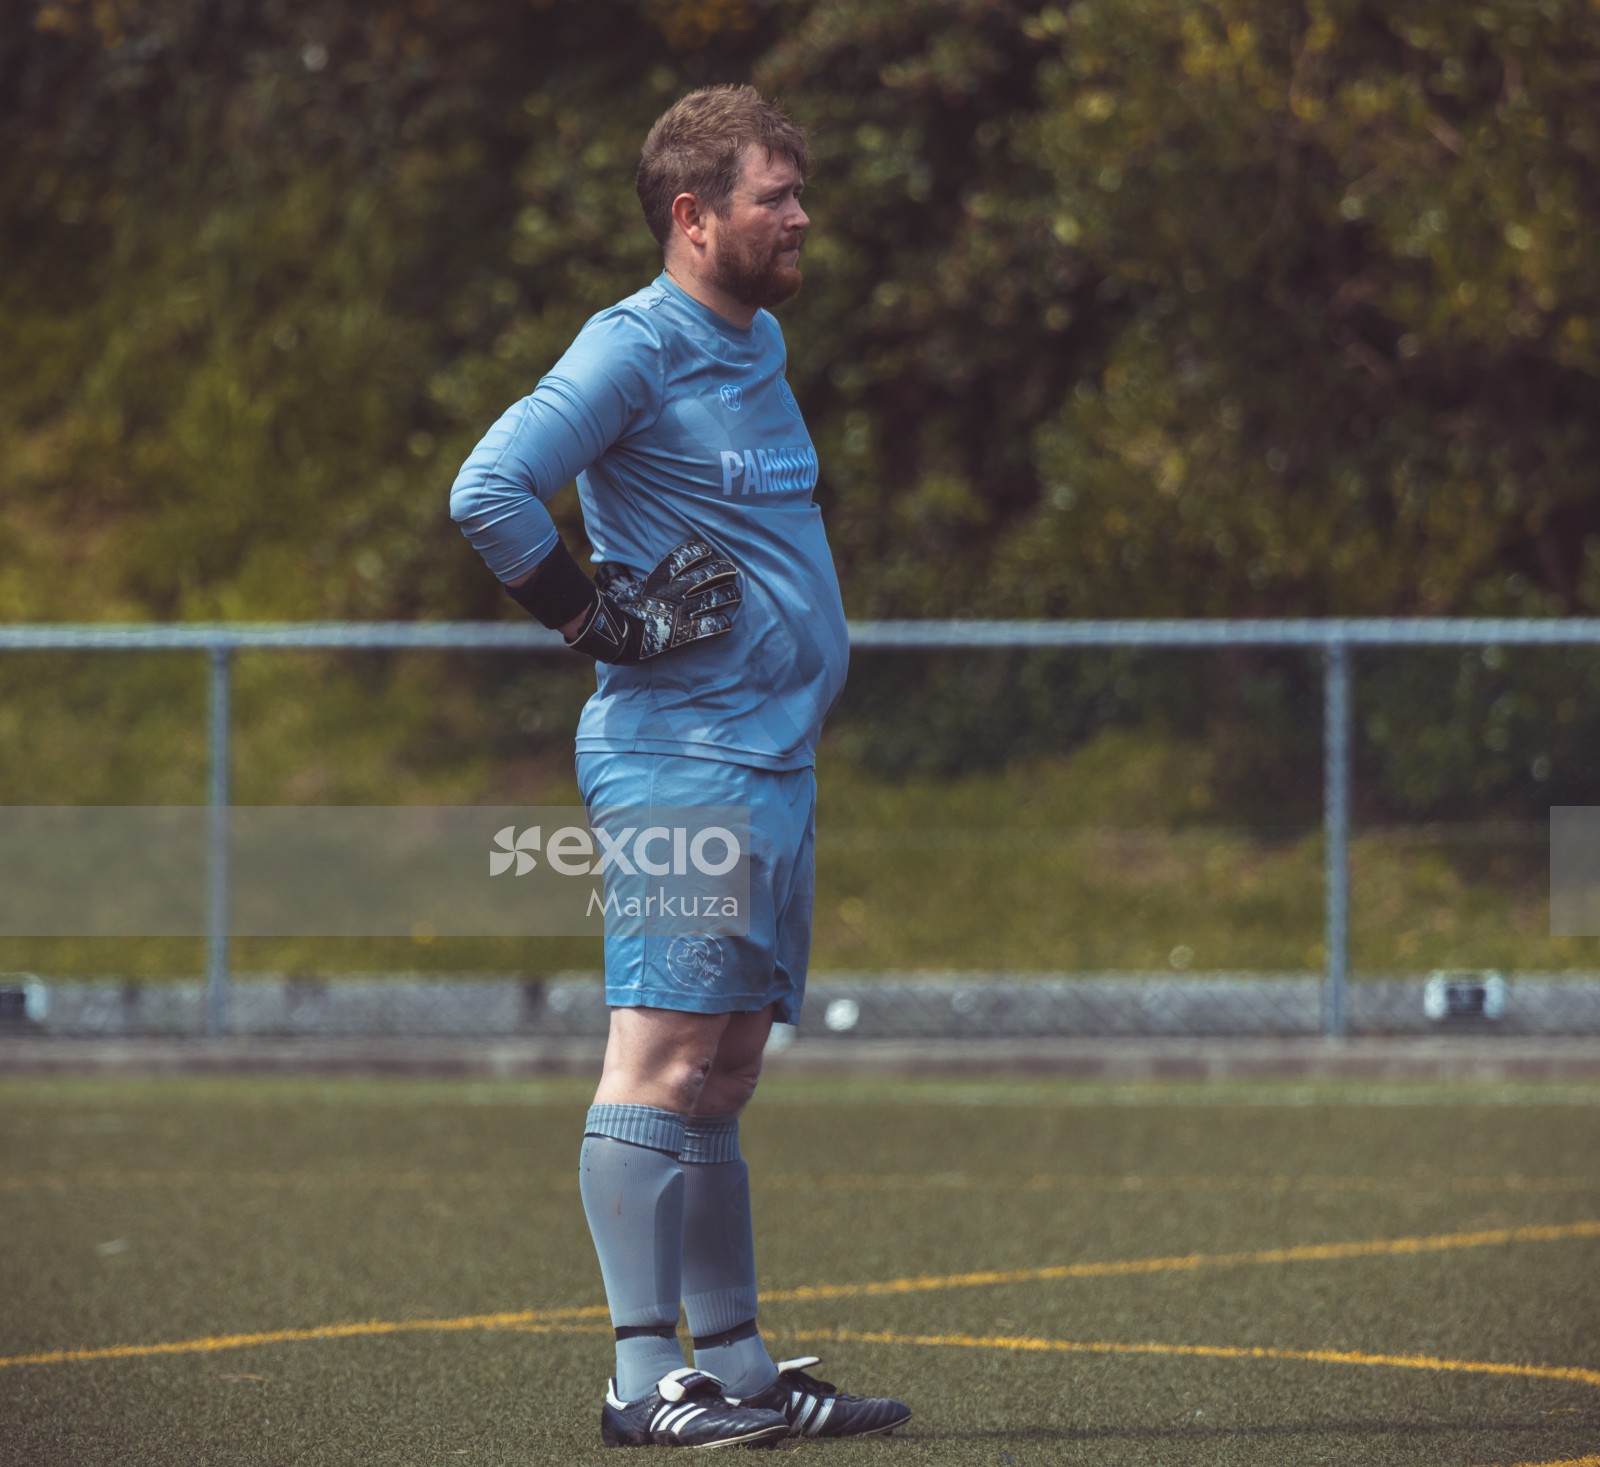 Goalkeeper standing with hands on waist - Sports Zone sunday league